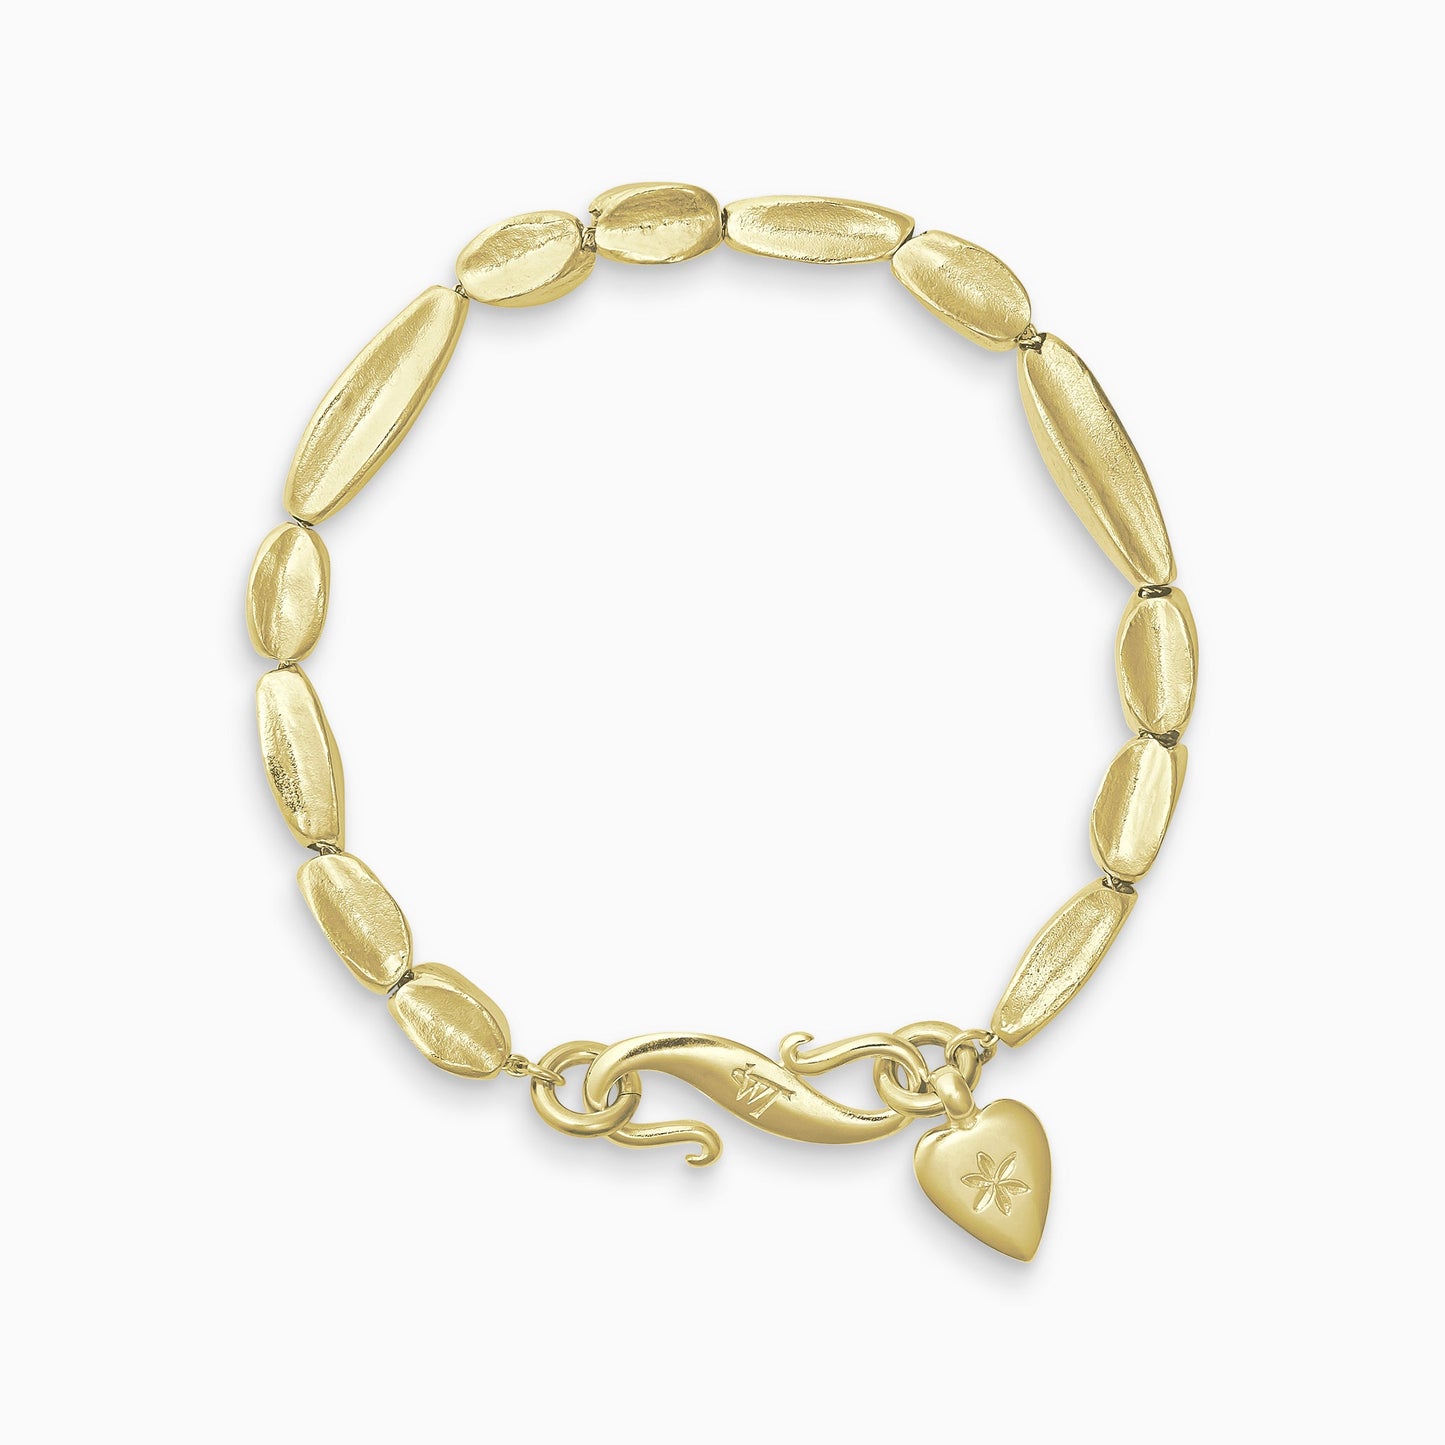 An 18ct Fairtrade yellow gold bracelet of handmade organic, concave, square section textured ‘Baluba’ beads. Finished with a smooth heart shaped charm, engraved with a 6 petal flower and our signature ’S’ clasp.Bracelet length 190mm.. Beads varying lengths from 10mm to 40mm. Cross section of each bead approximately 6mm.